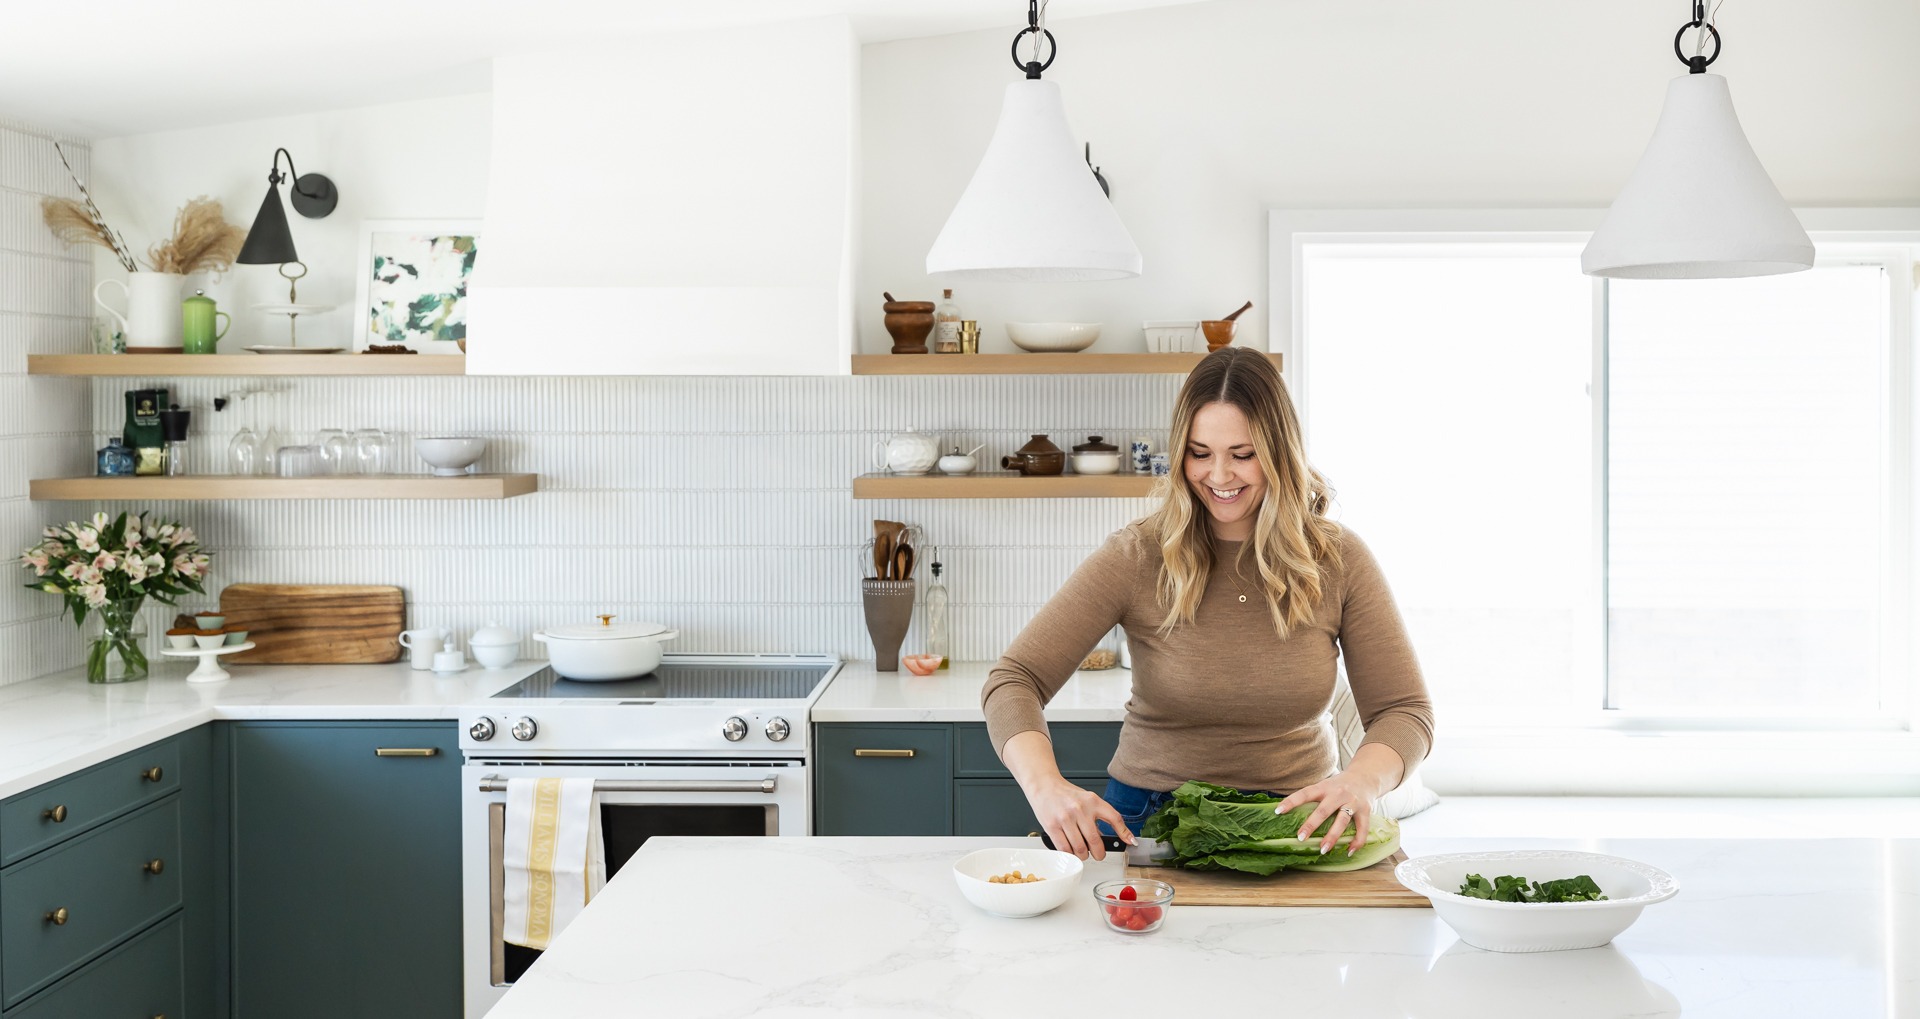 A person is preparing food in a modern kitchen with white subway tiles, open shelving, dark cabinets, marble countertops, and pendant lighting.